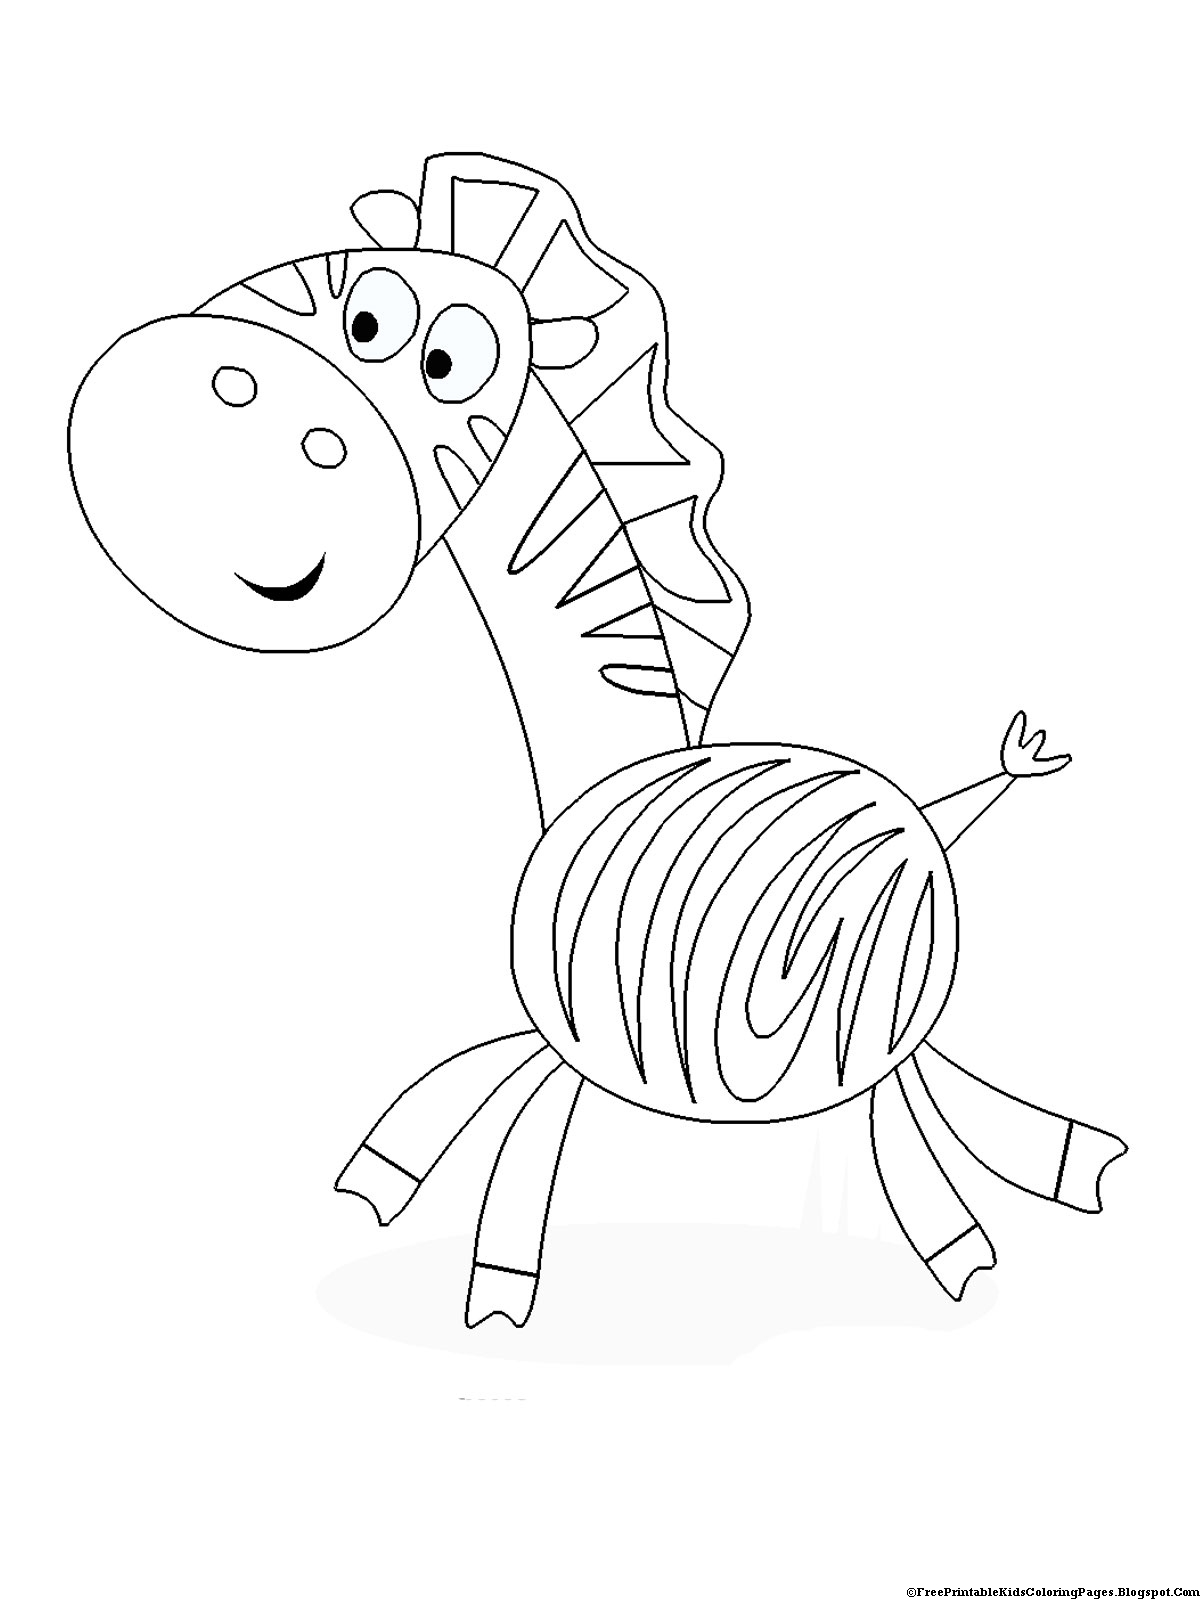  Free Print Out Coloring Pages   6